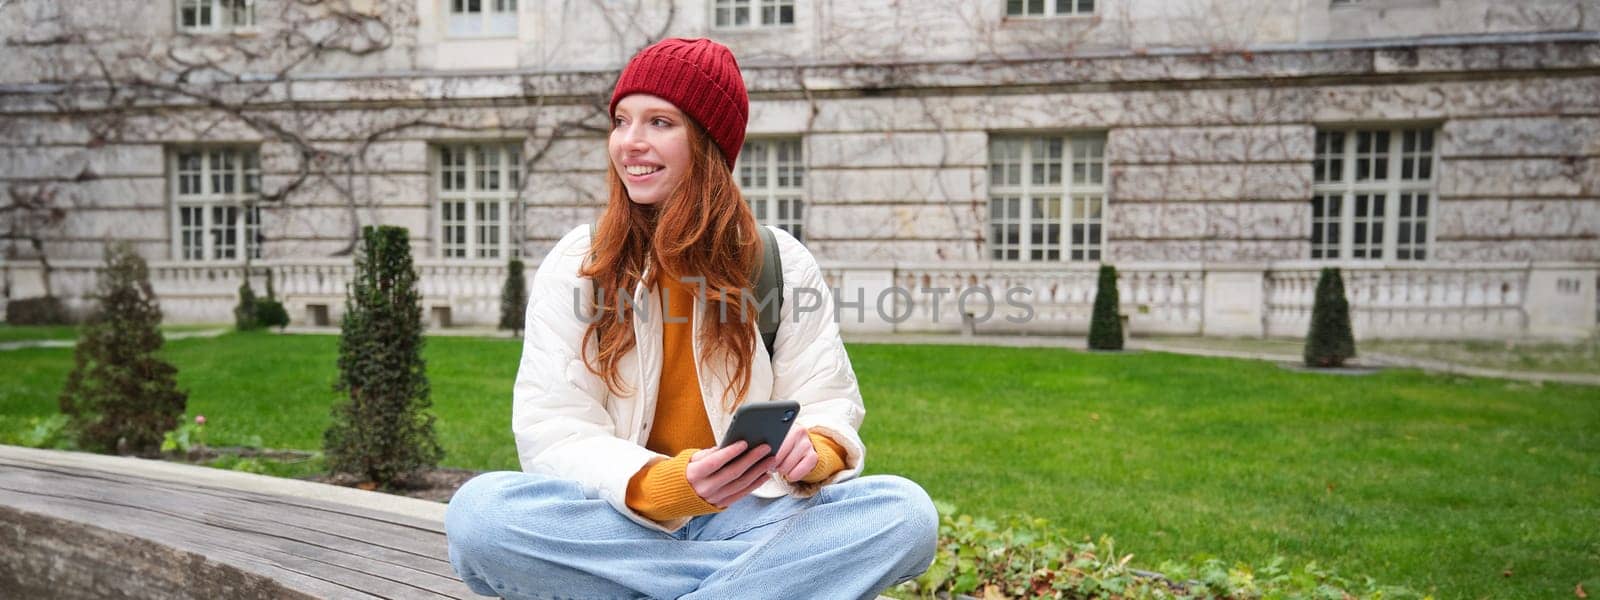 Young smiling redhead girl sits on bench and uses smartphone app, reads news online, watches video on mobile phone while relaxed in park.